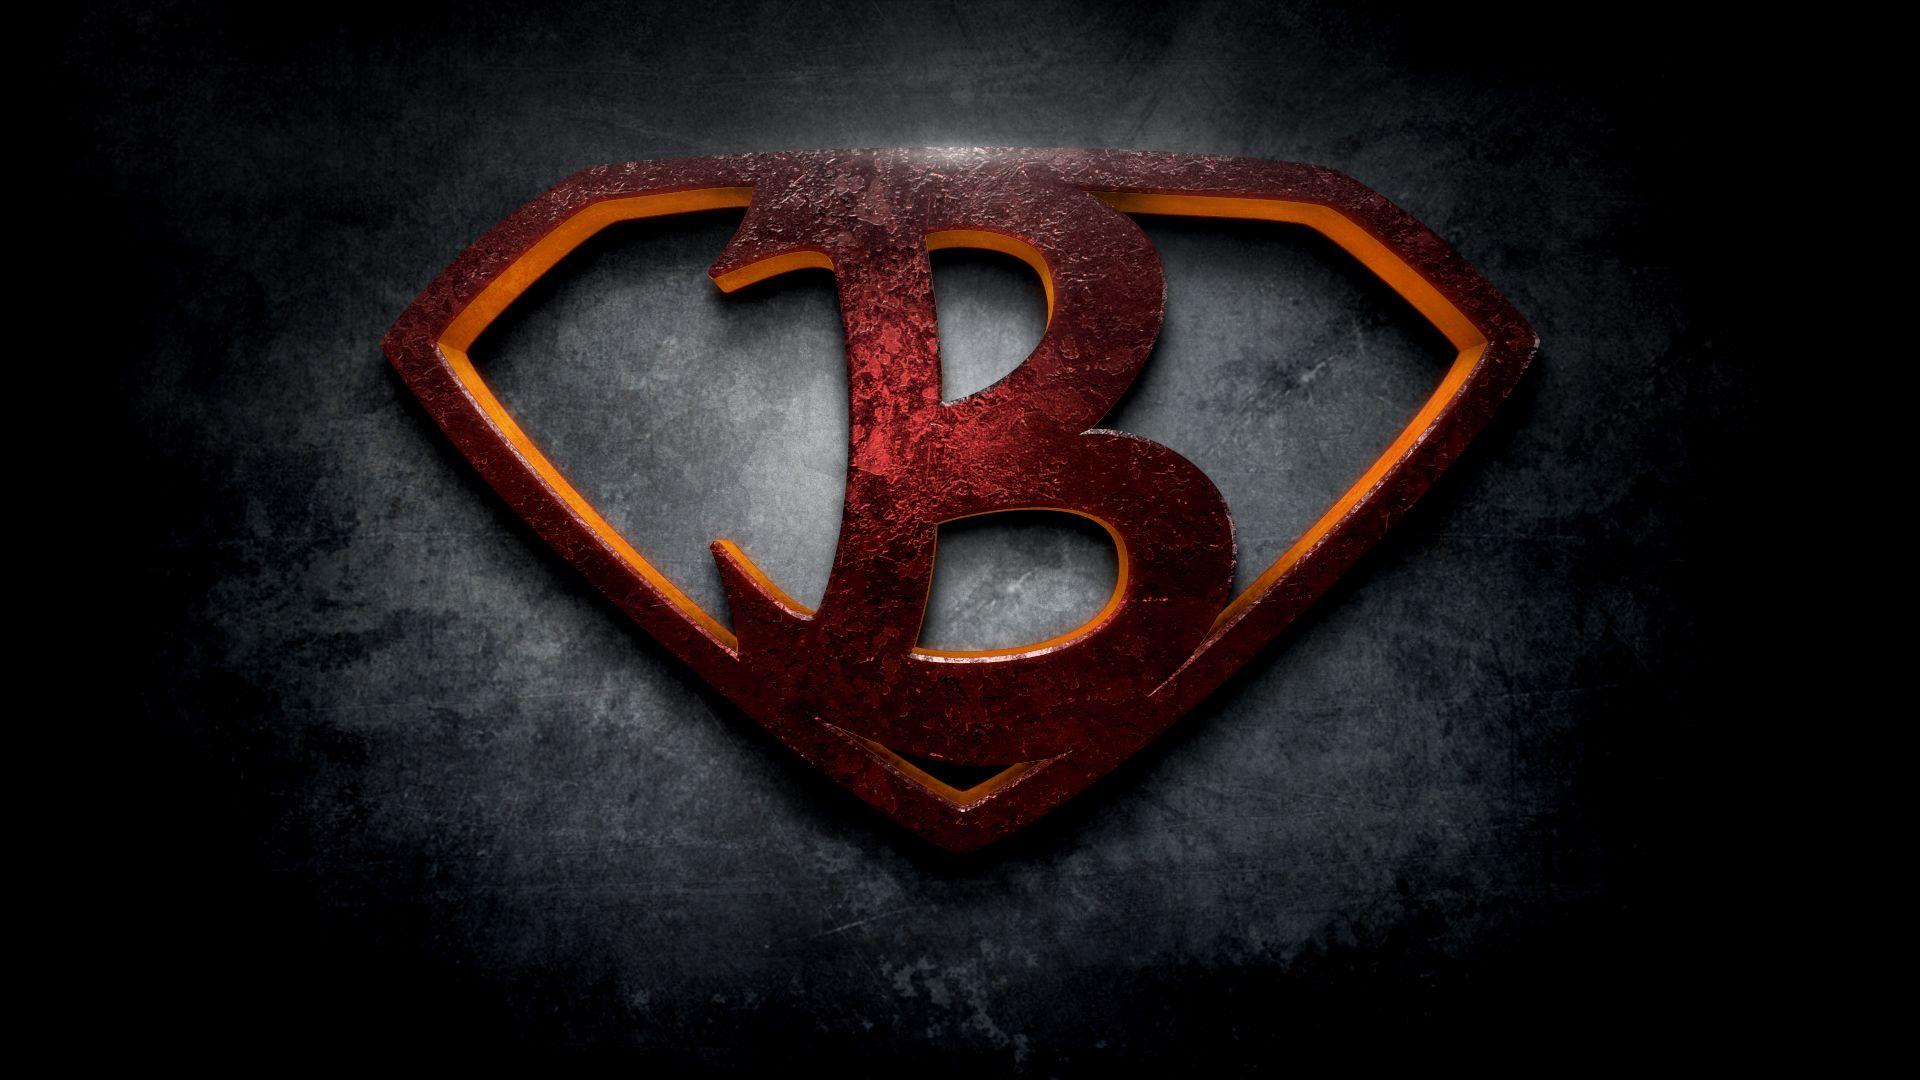 Cool Letter B Logo - The letter B in the style of “Man of Steel”